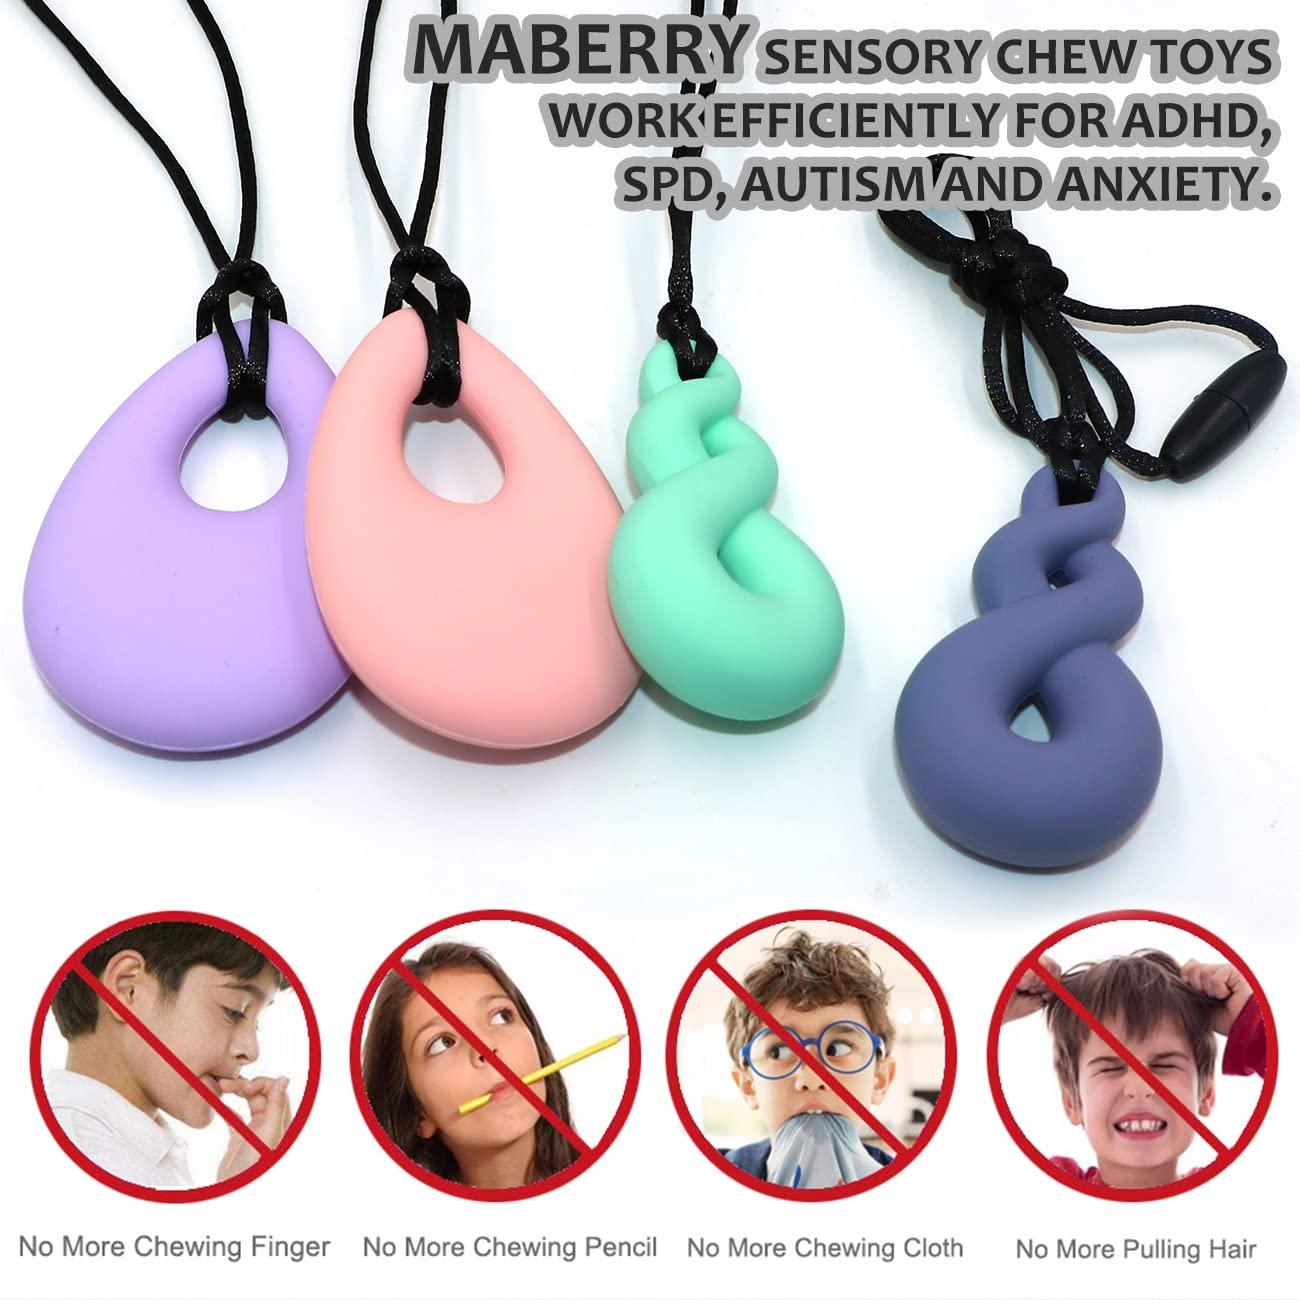 Buy Chew Necklace for Boys Girls Adults, 3 Pack Silicone Chewy Necklace  Sensory for Kids with Autism ADHD Anxiety Reduce Fidgeting, Oral Chew Toys  Sensory Necklaces for Chewing, BPA Free Online at